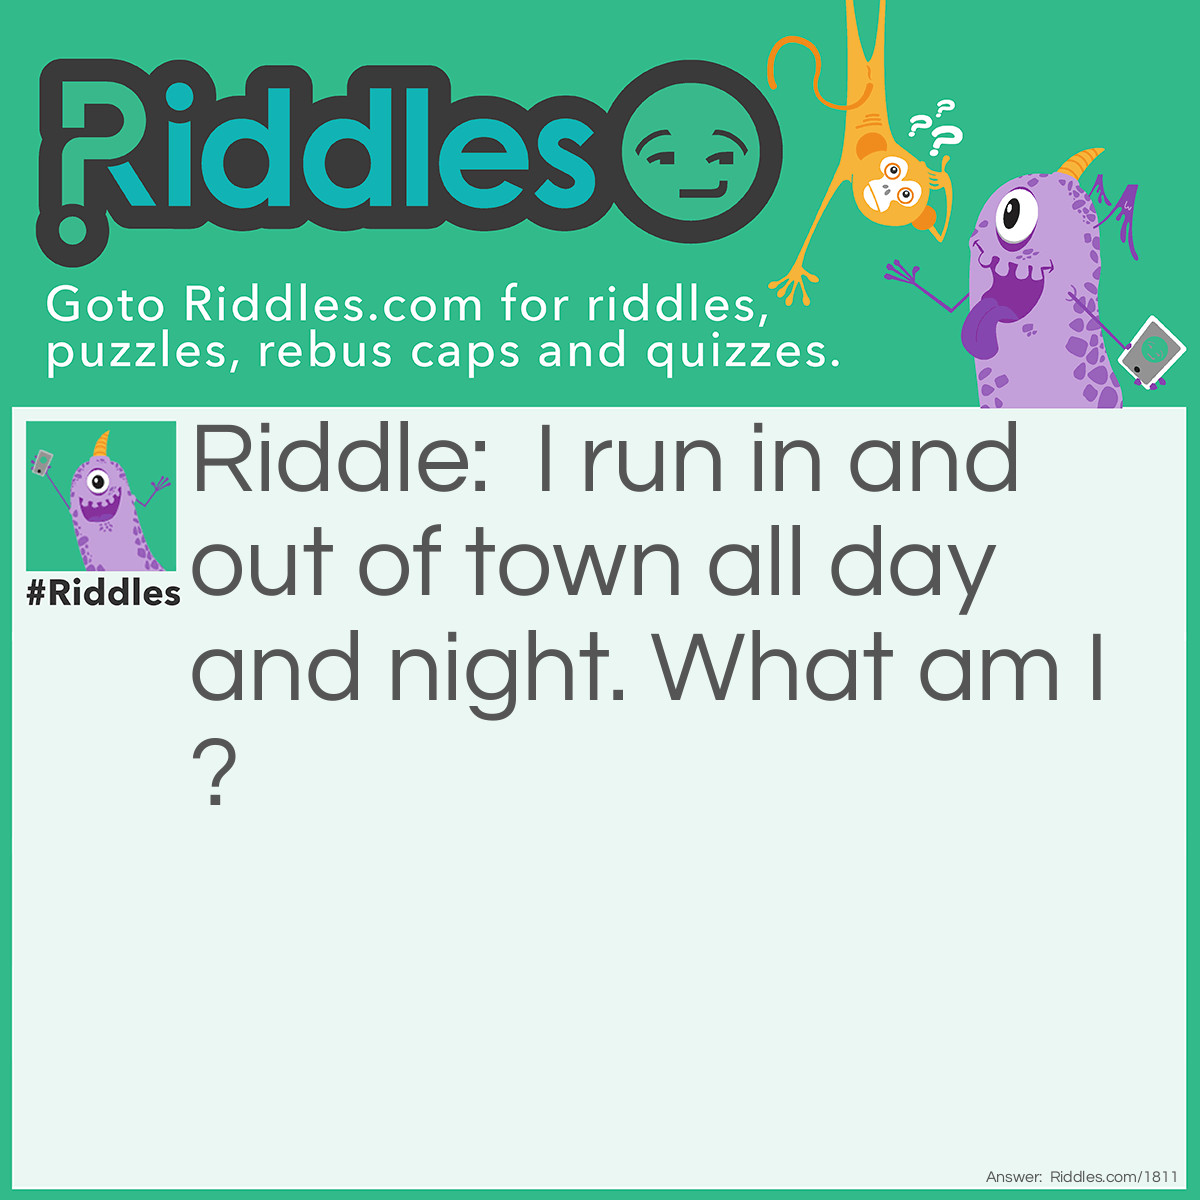 Riddle: I run in and out of town all day and night. What am I? Answer: A road.